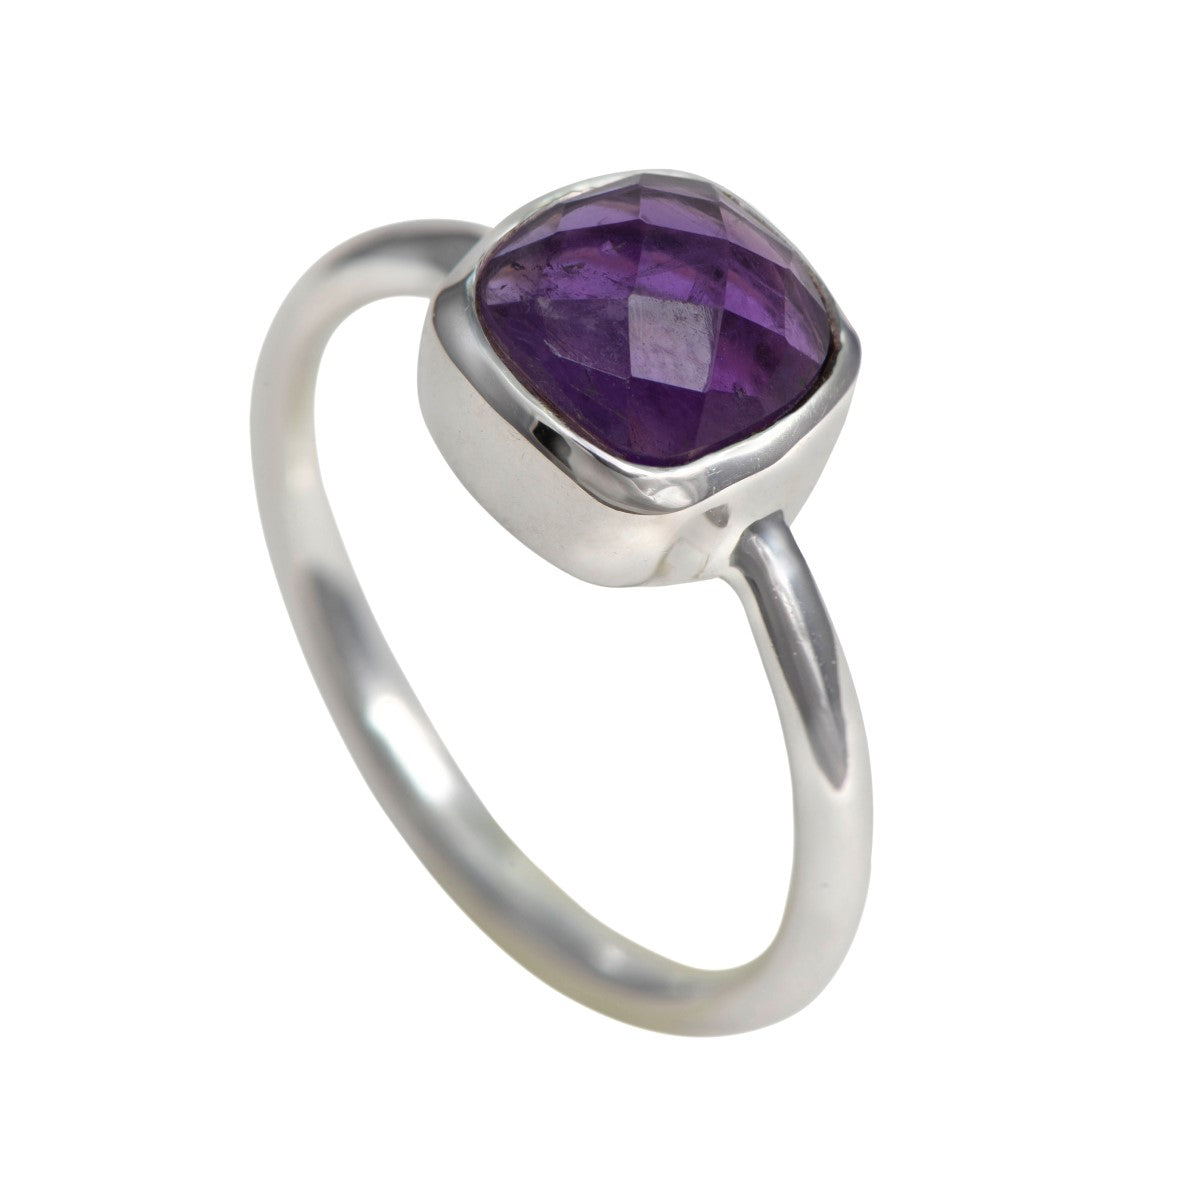 Faceted Square Cut Natural Gemstone Sterling Silver Solitaire Ring - Amethyst